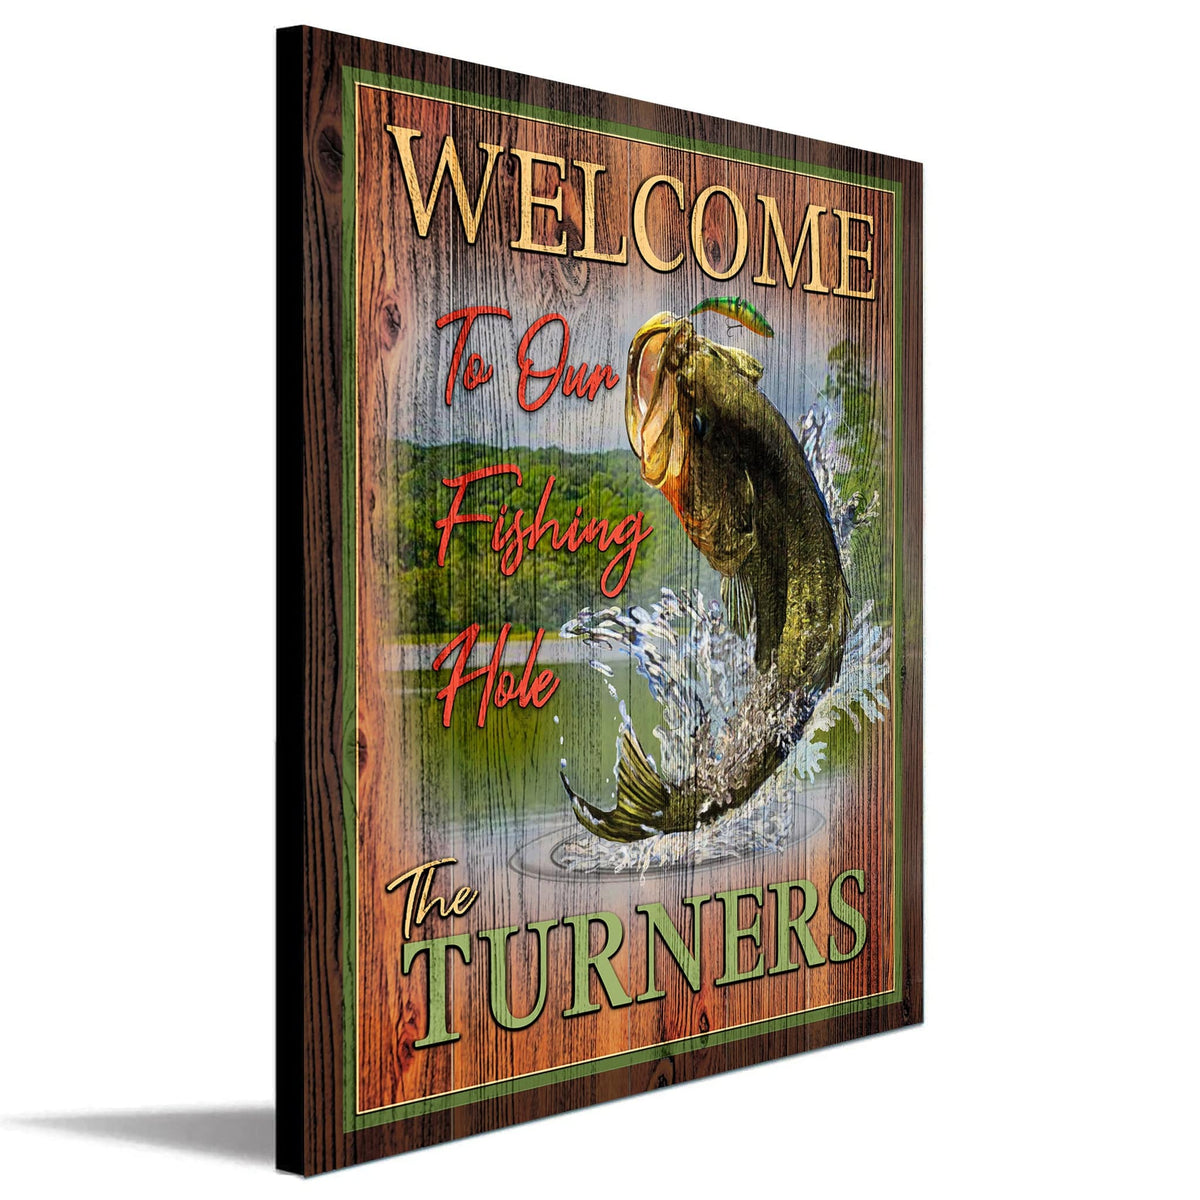 Personalized gift for the bass fisherman - wood sign from Personal Prints